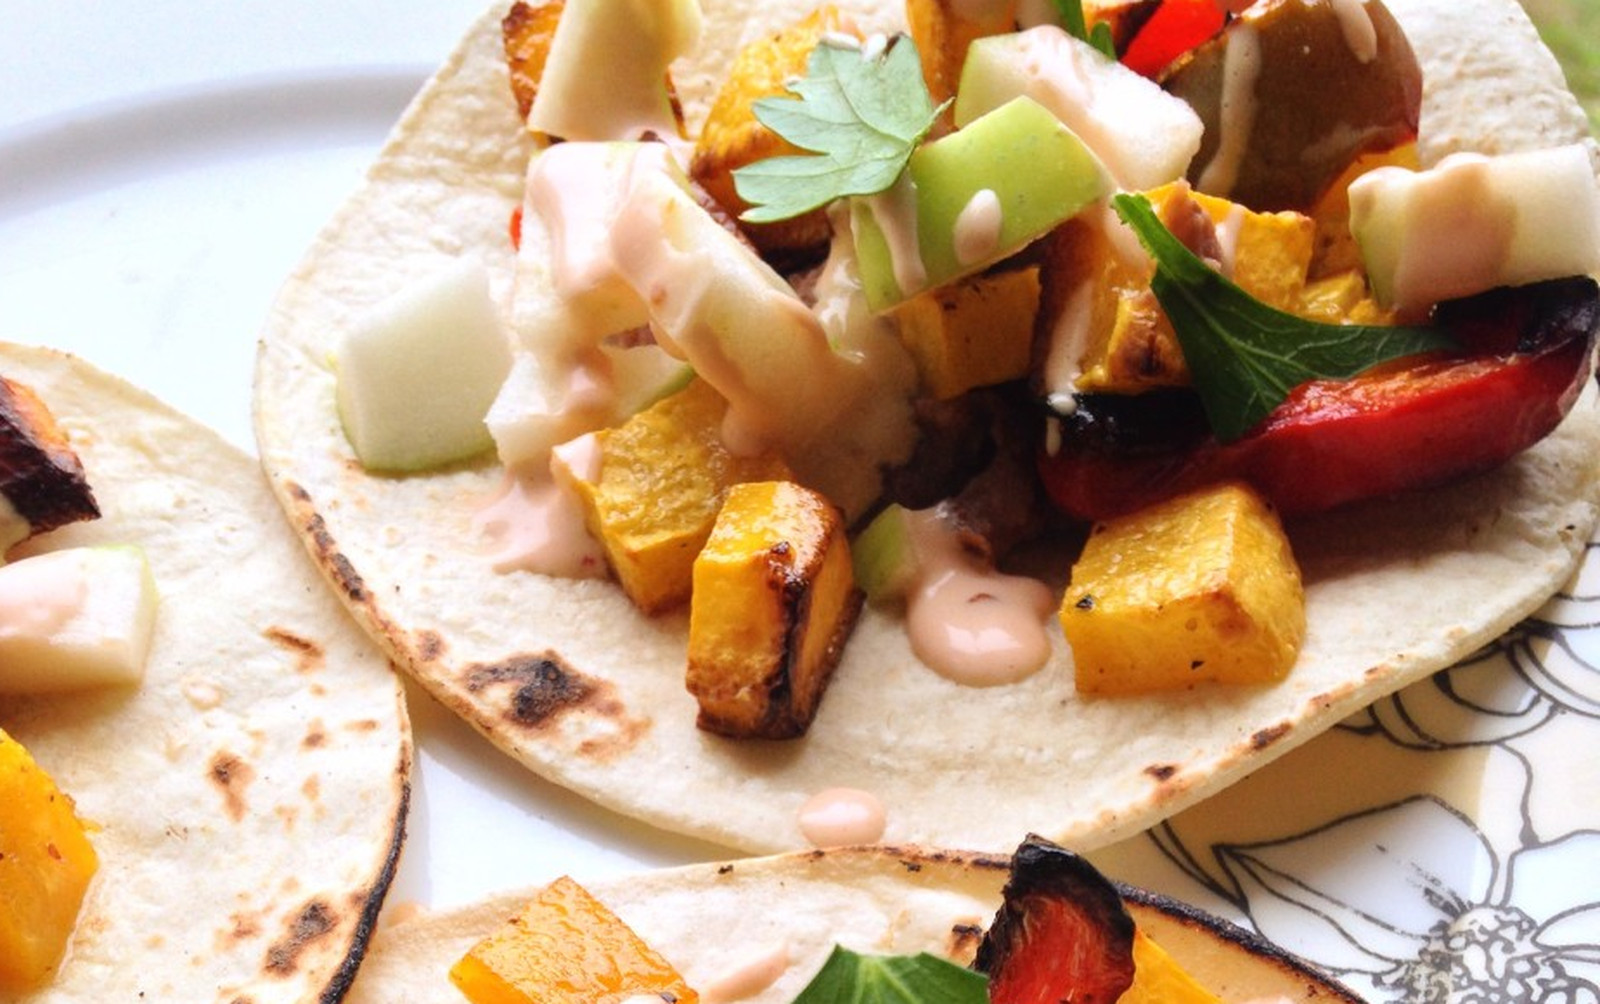 Roasted Butternut Squash Tacos With Crisp Apple and Chipotle-Lime Drizzle [Vegan]